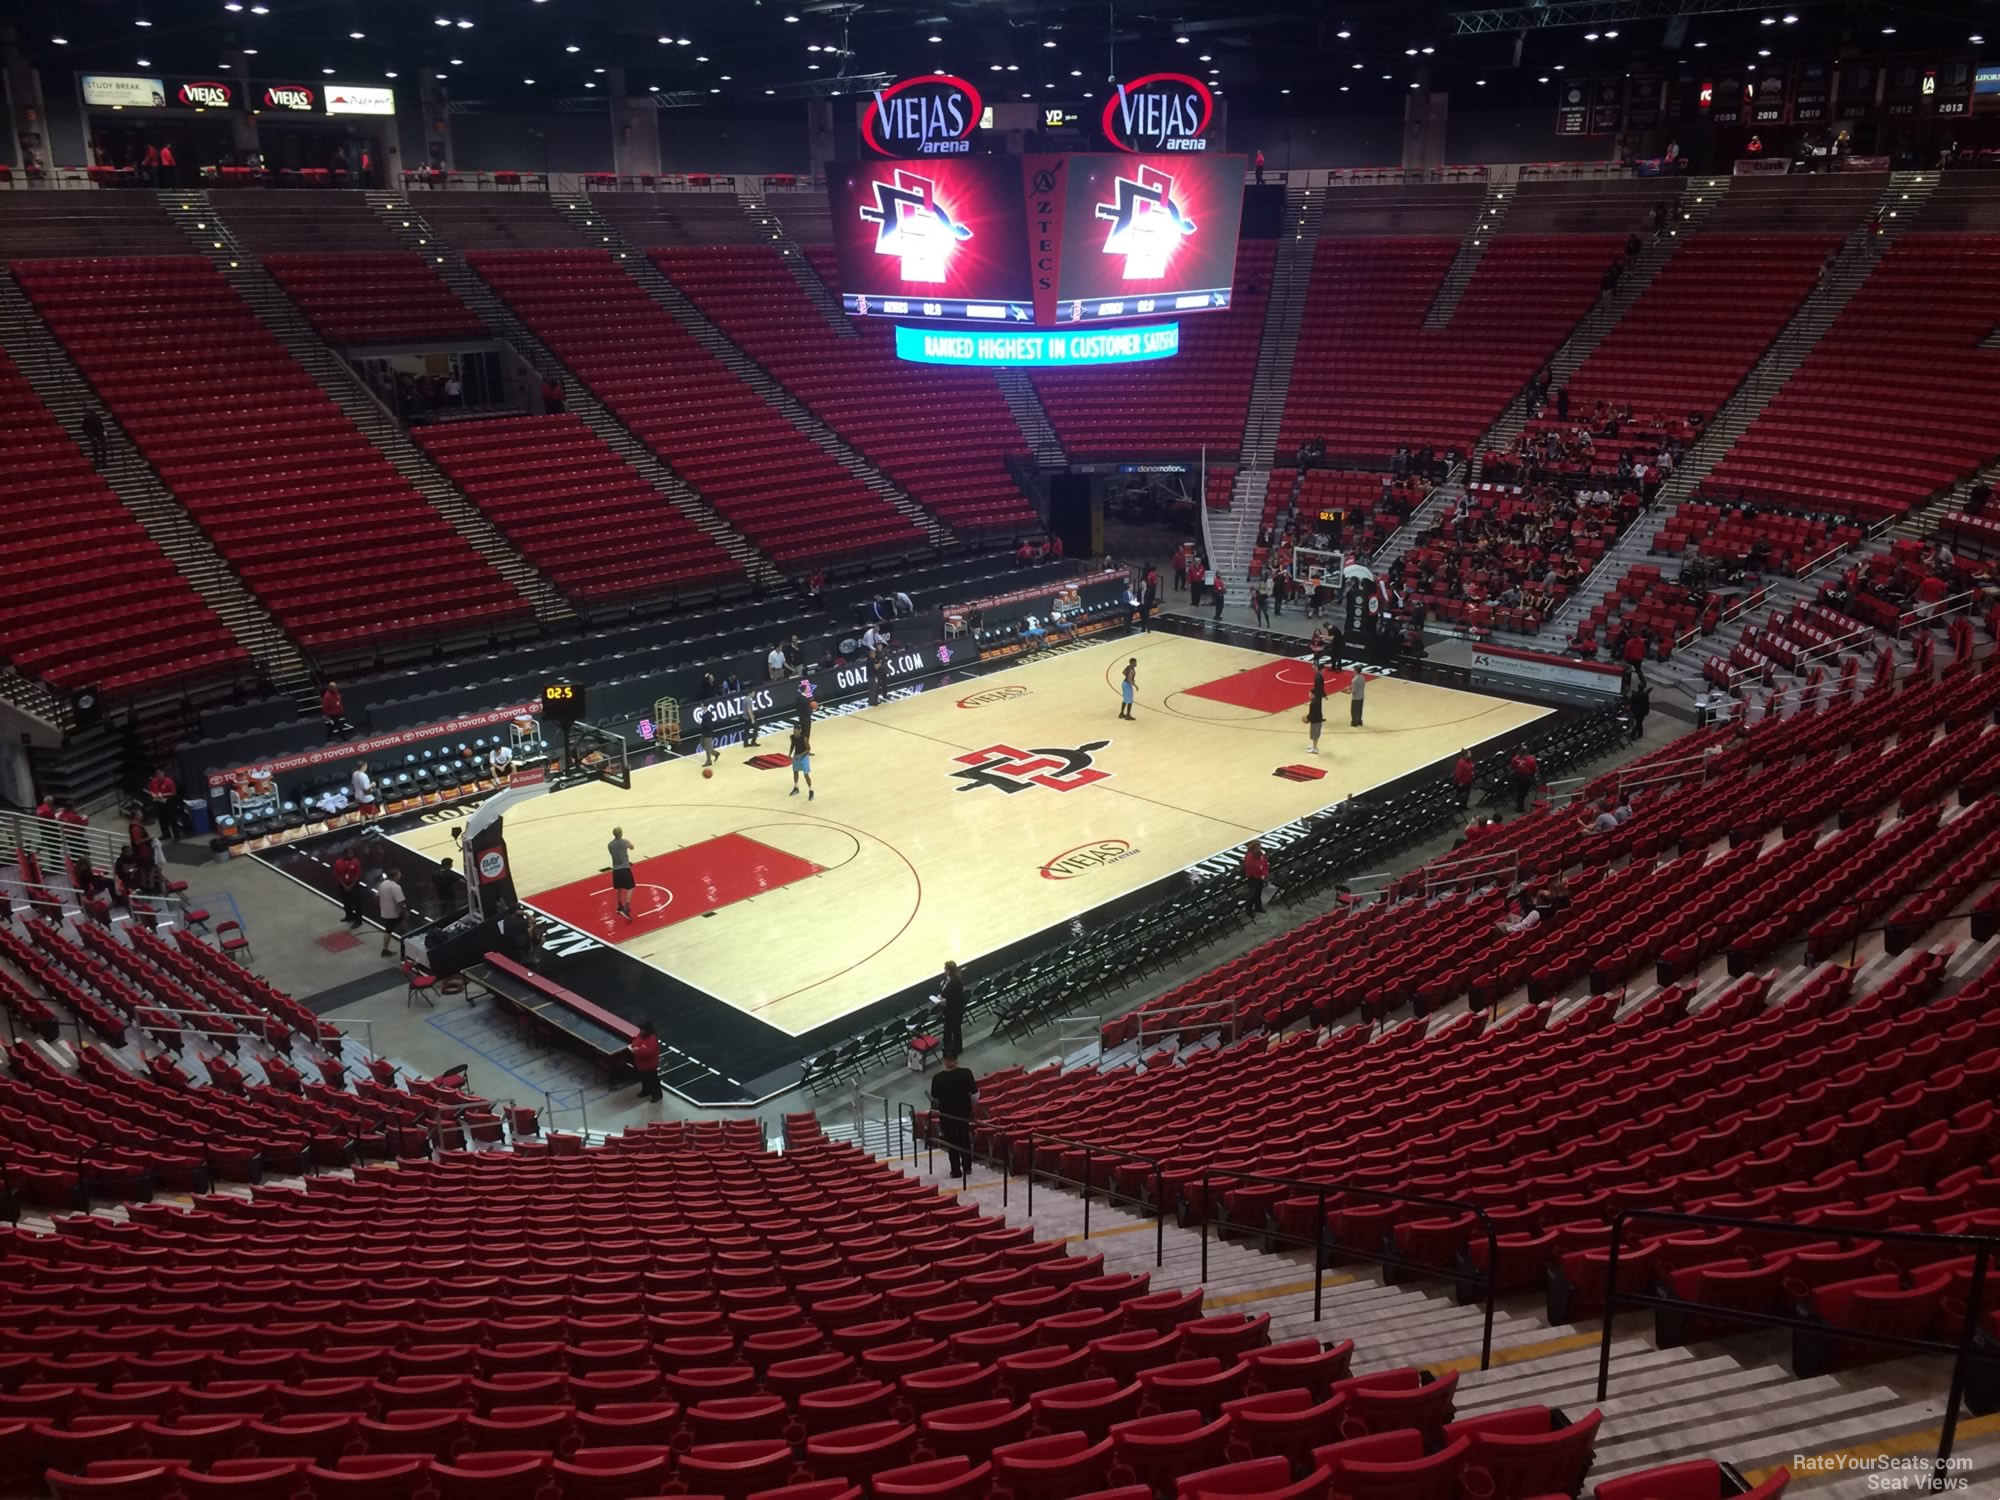 section c, row 30 seat view  - viejas arena